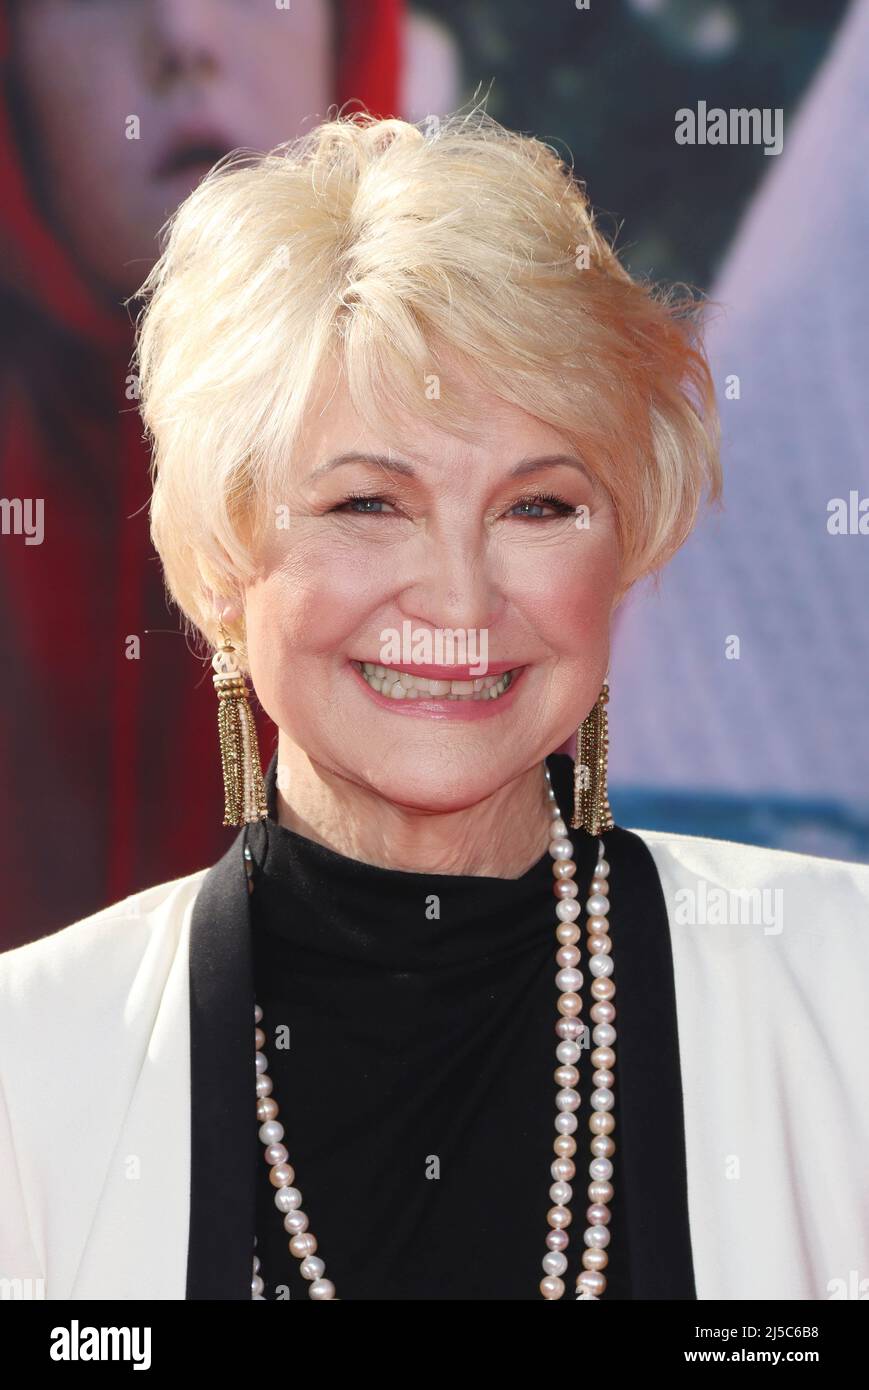 Los Angeles, USA. 21st Apr, 2022. Dee Wallace 2022/04/21 The 40th Anniversary Screening of “E.T. the Extra-Terrestrial” held at TCL Chinese Theatre in Hollywood, CA, Credit: Cronos/Alamy Live News Stock Photo